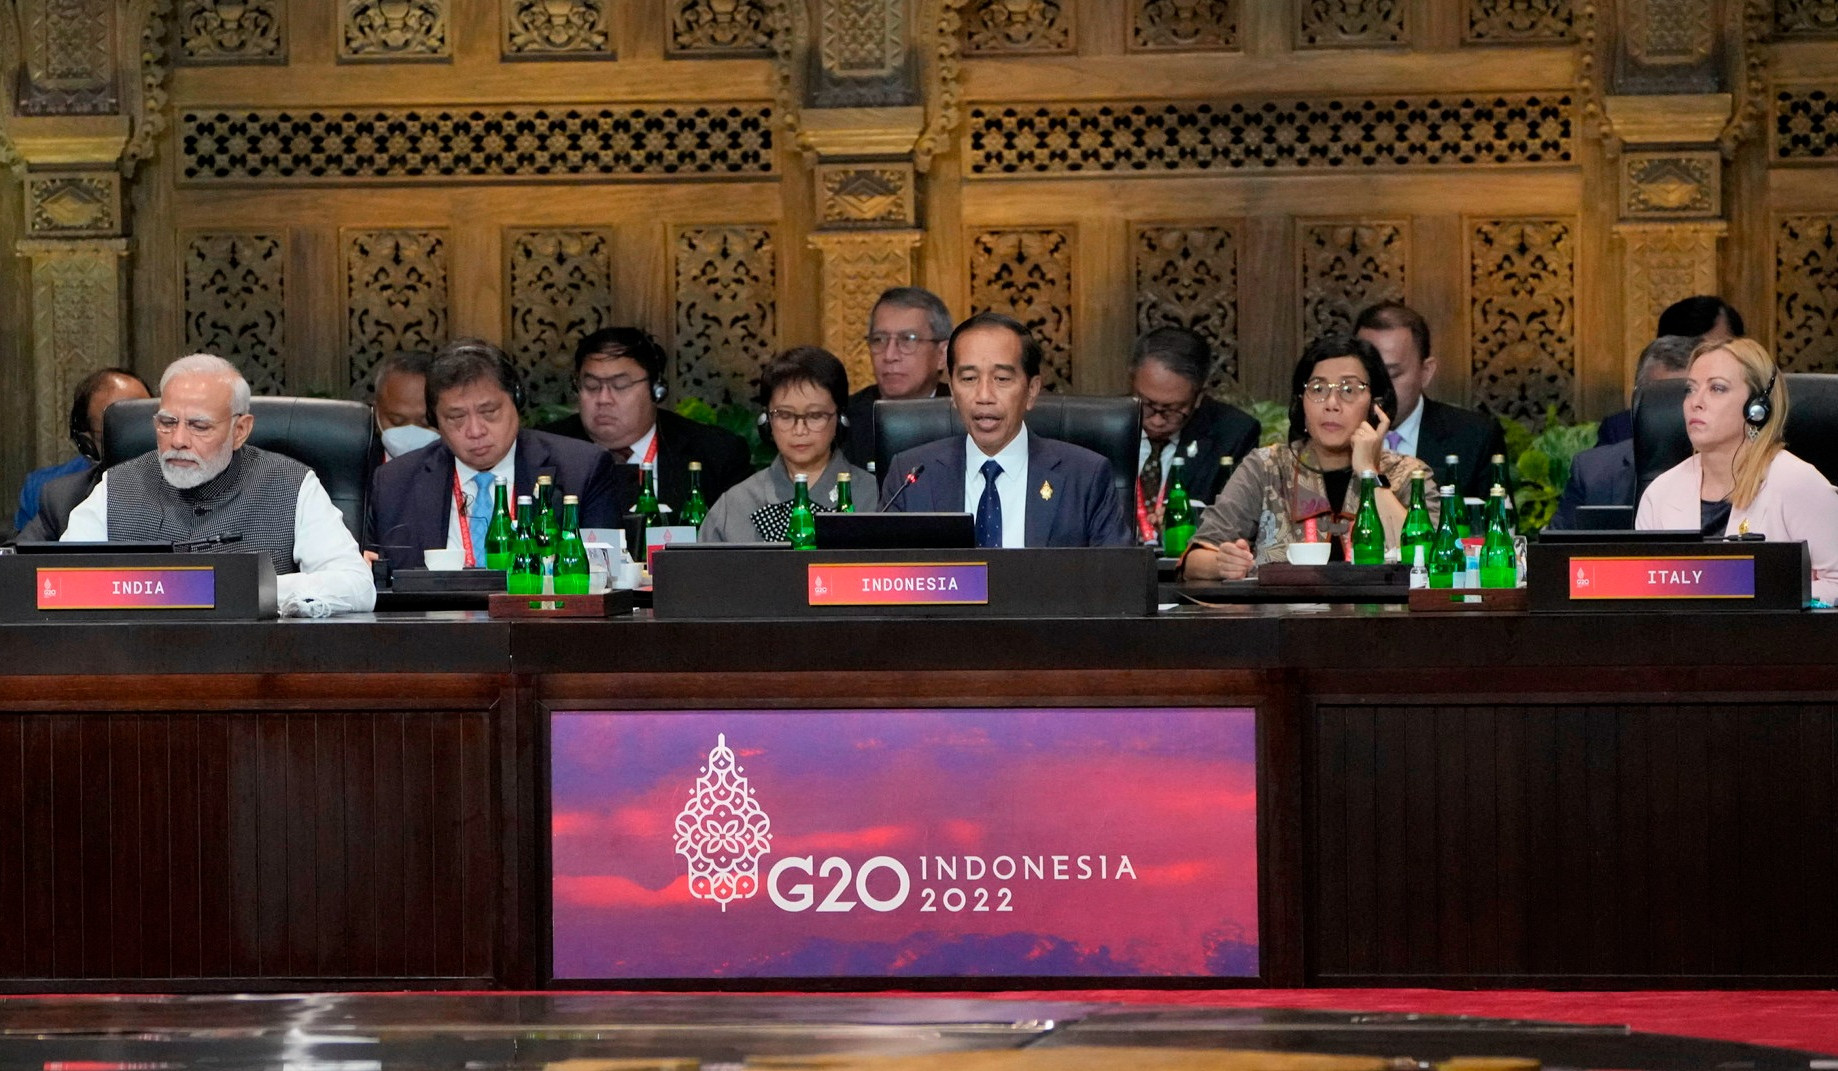 G20 leaders adopted joint statement